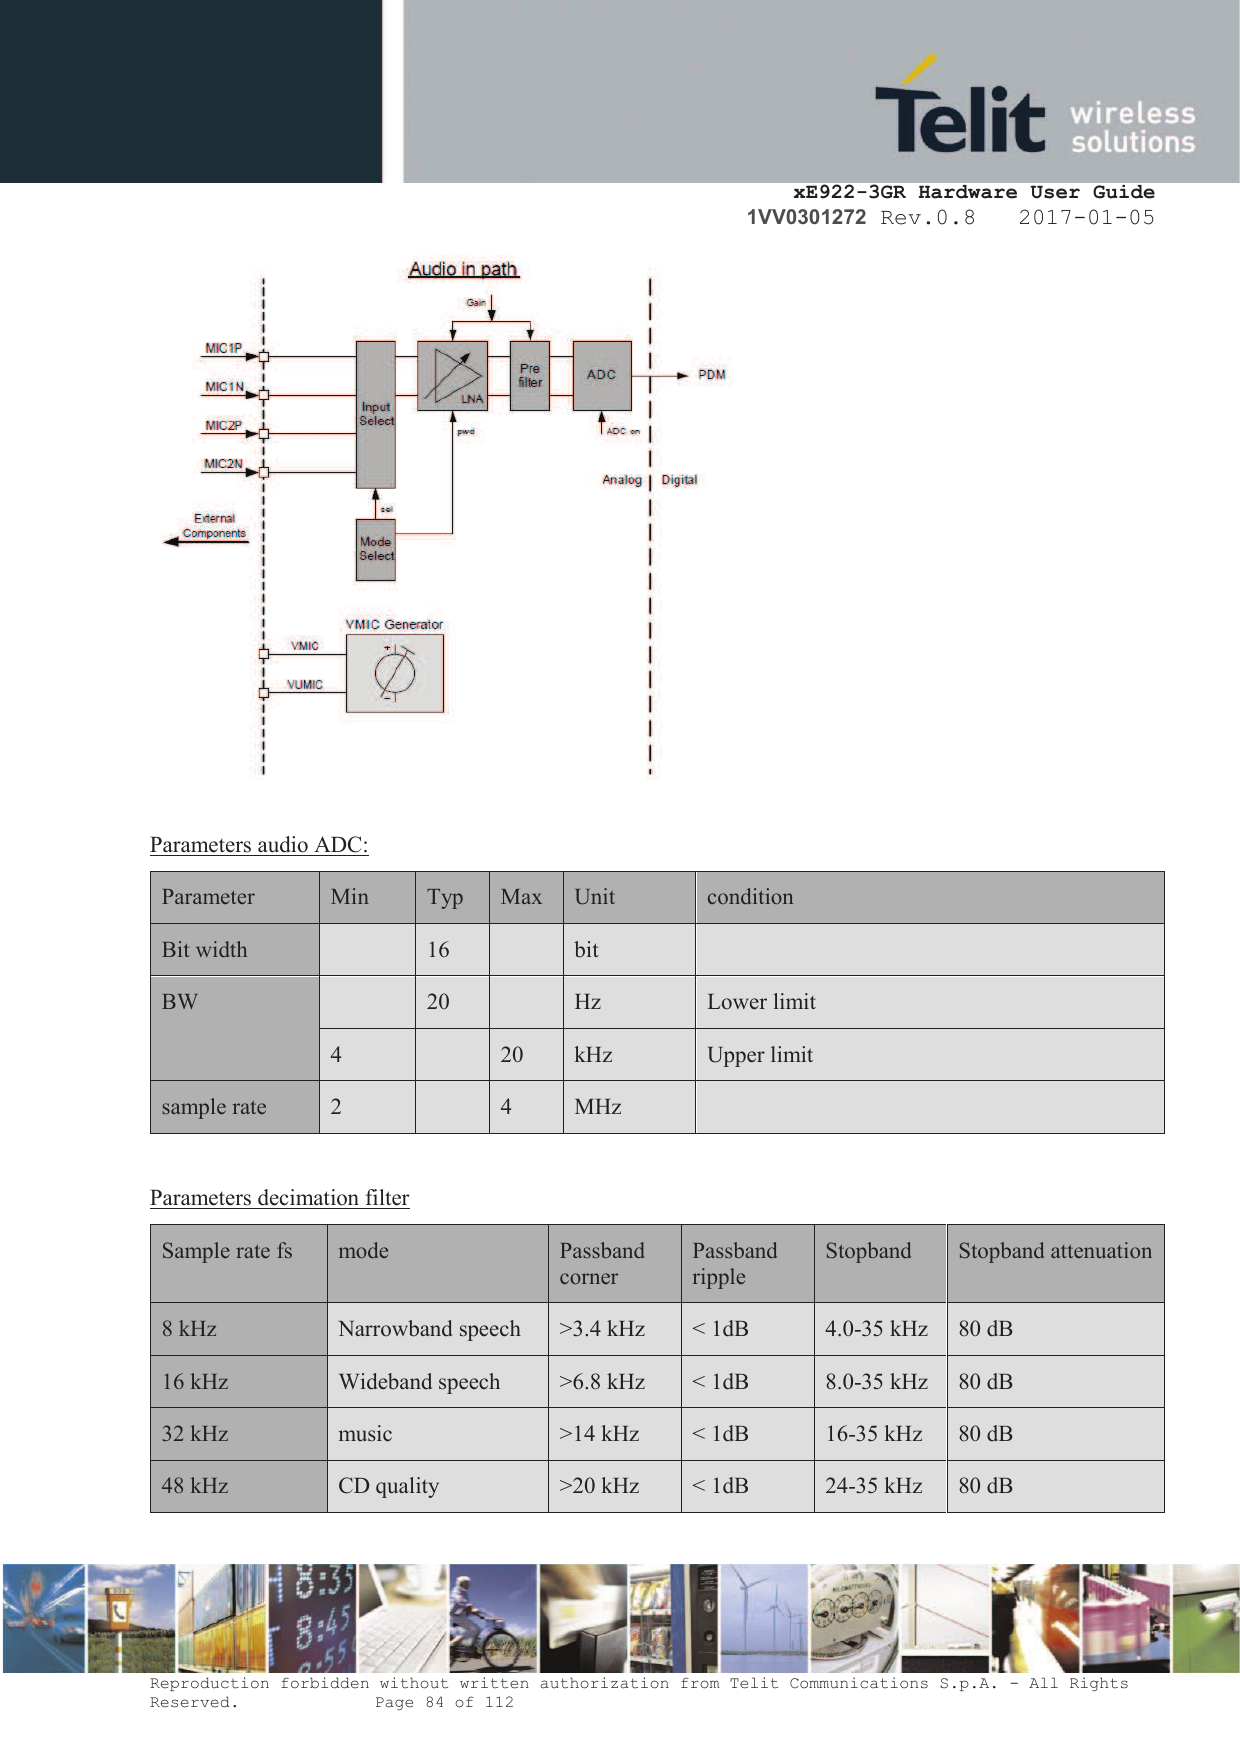     xE922-3GR Hardware User Guide 1VV0301272 Rev.0.8   2017-01-05 Reproduction forbidden without written authorization from Telit Communications S.p.A. - All Rights Reserved.    Page 84 of 112    Parameters audio ADC: Parameter  Min Typ Max Unit condition Bit width  16  bit  BW  20  Hz Lower limit 4  20 kHz Upper limit sample rate 2  4 MHz   Parameters decimation filter Sample rate fs mode Passband corner Passband ripple Stopband Stopband attenuation 8 kHz Narrowband speech &gt;3.4 kHz &lt; 1dB 4.0-35 kHz 80 dB 16 kHz Wideband speech &gt;6.8 kHz &lt; 1dB 8.0-35 kHz 80 dB 32 kHz music &gt;14 kHz &lt; 1dB 16-35 kHz 80 dB 48 kHz CD quality &gt;20 kHz &lt; 1dB 24-35 kHz 80 dB  